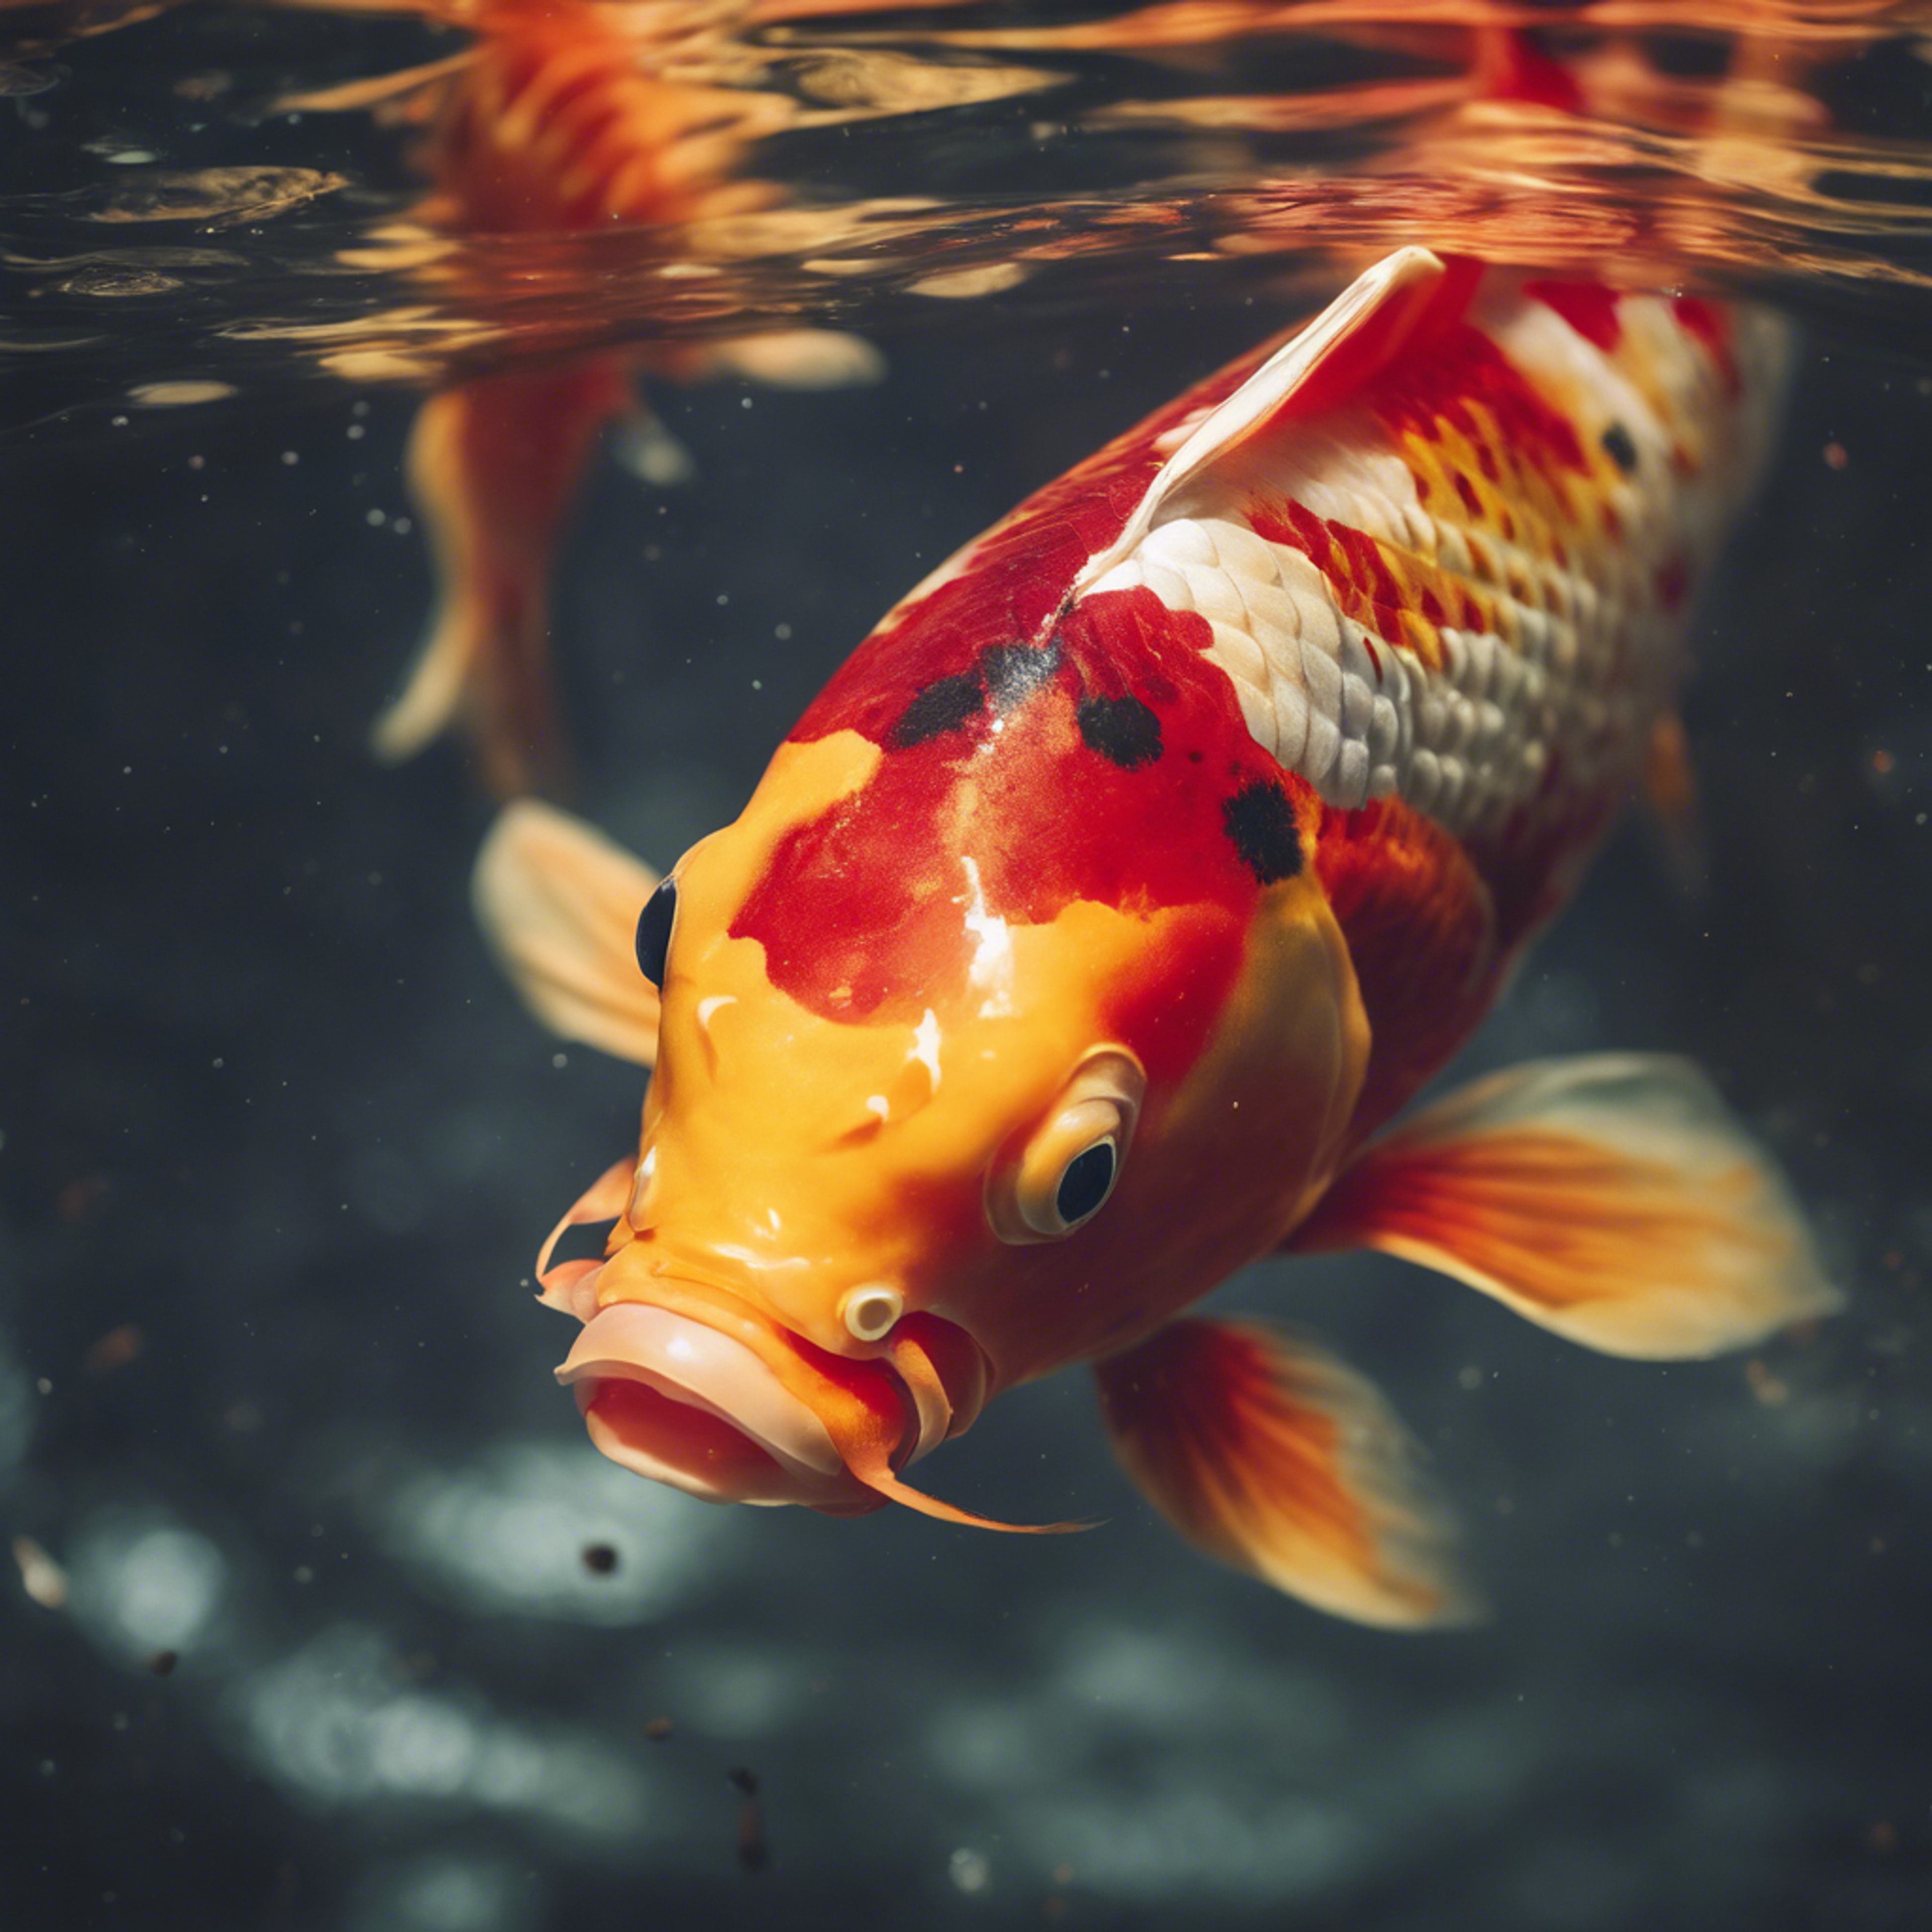 A vibrant red and gold koi fish swimming in a clear pond. Tapeet[1dfeb98f60cb429caecb]